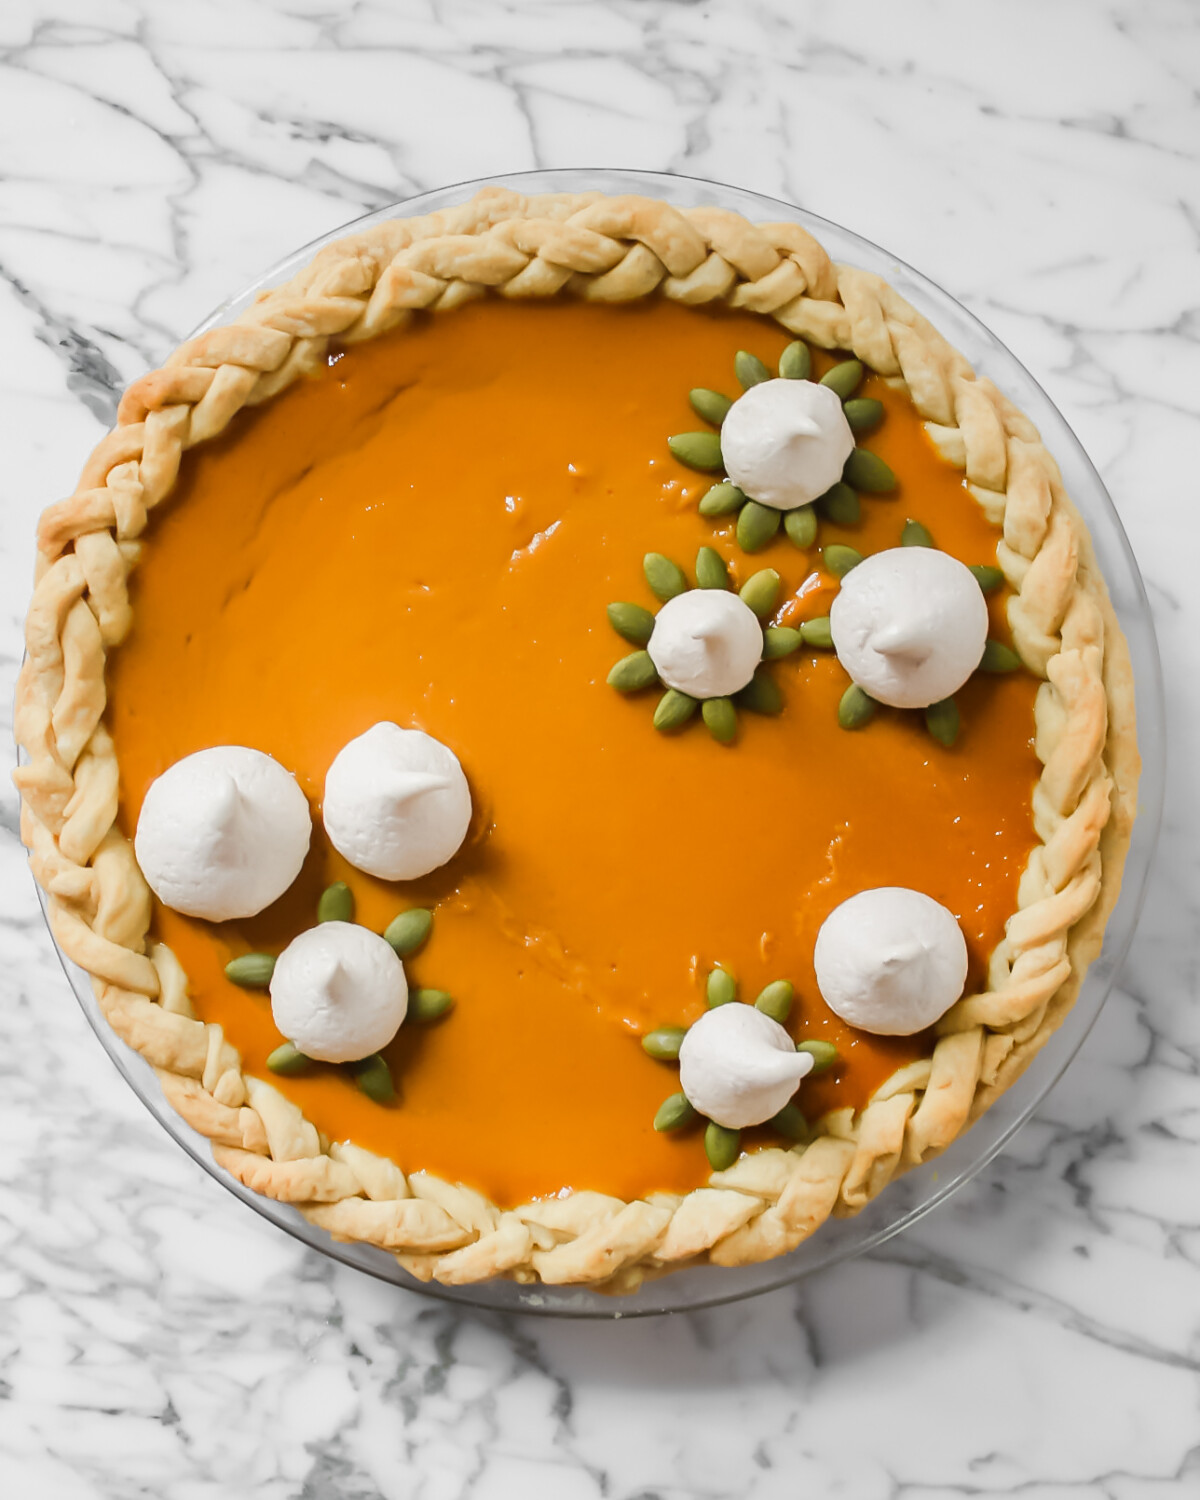 Photography of a pumpkin pie garnished with spiced meringue cookies and pepitas.